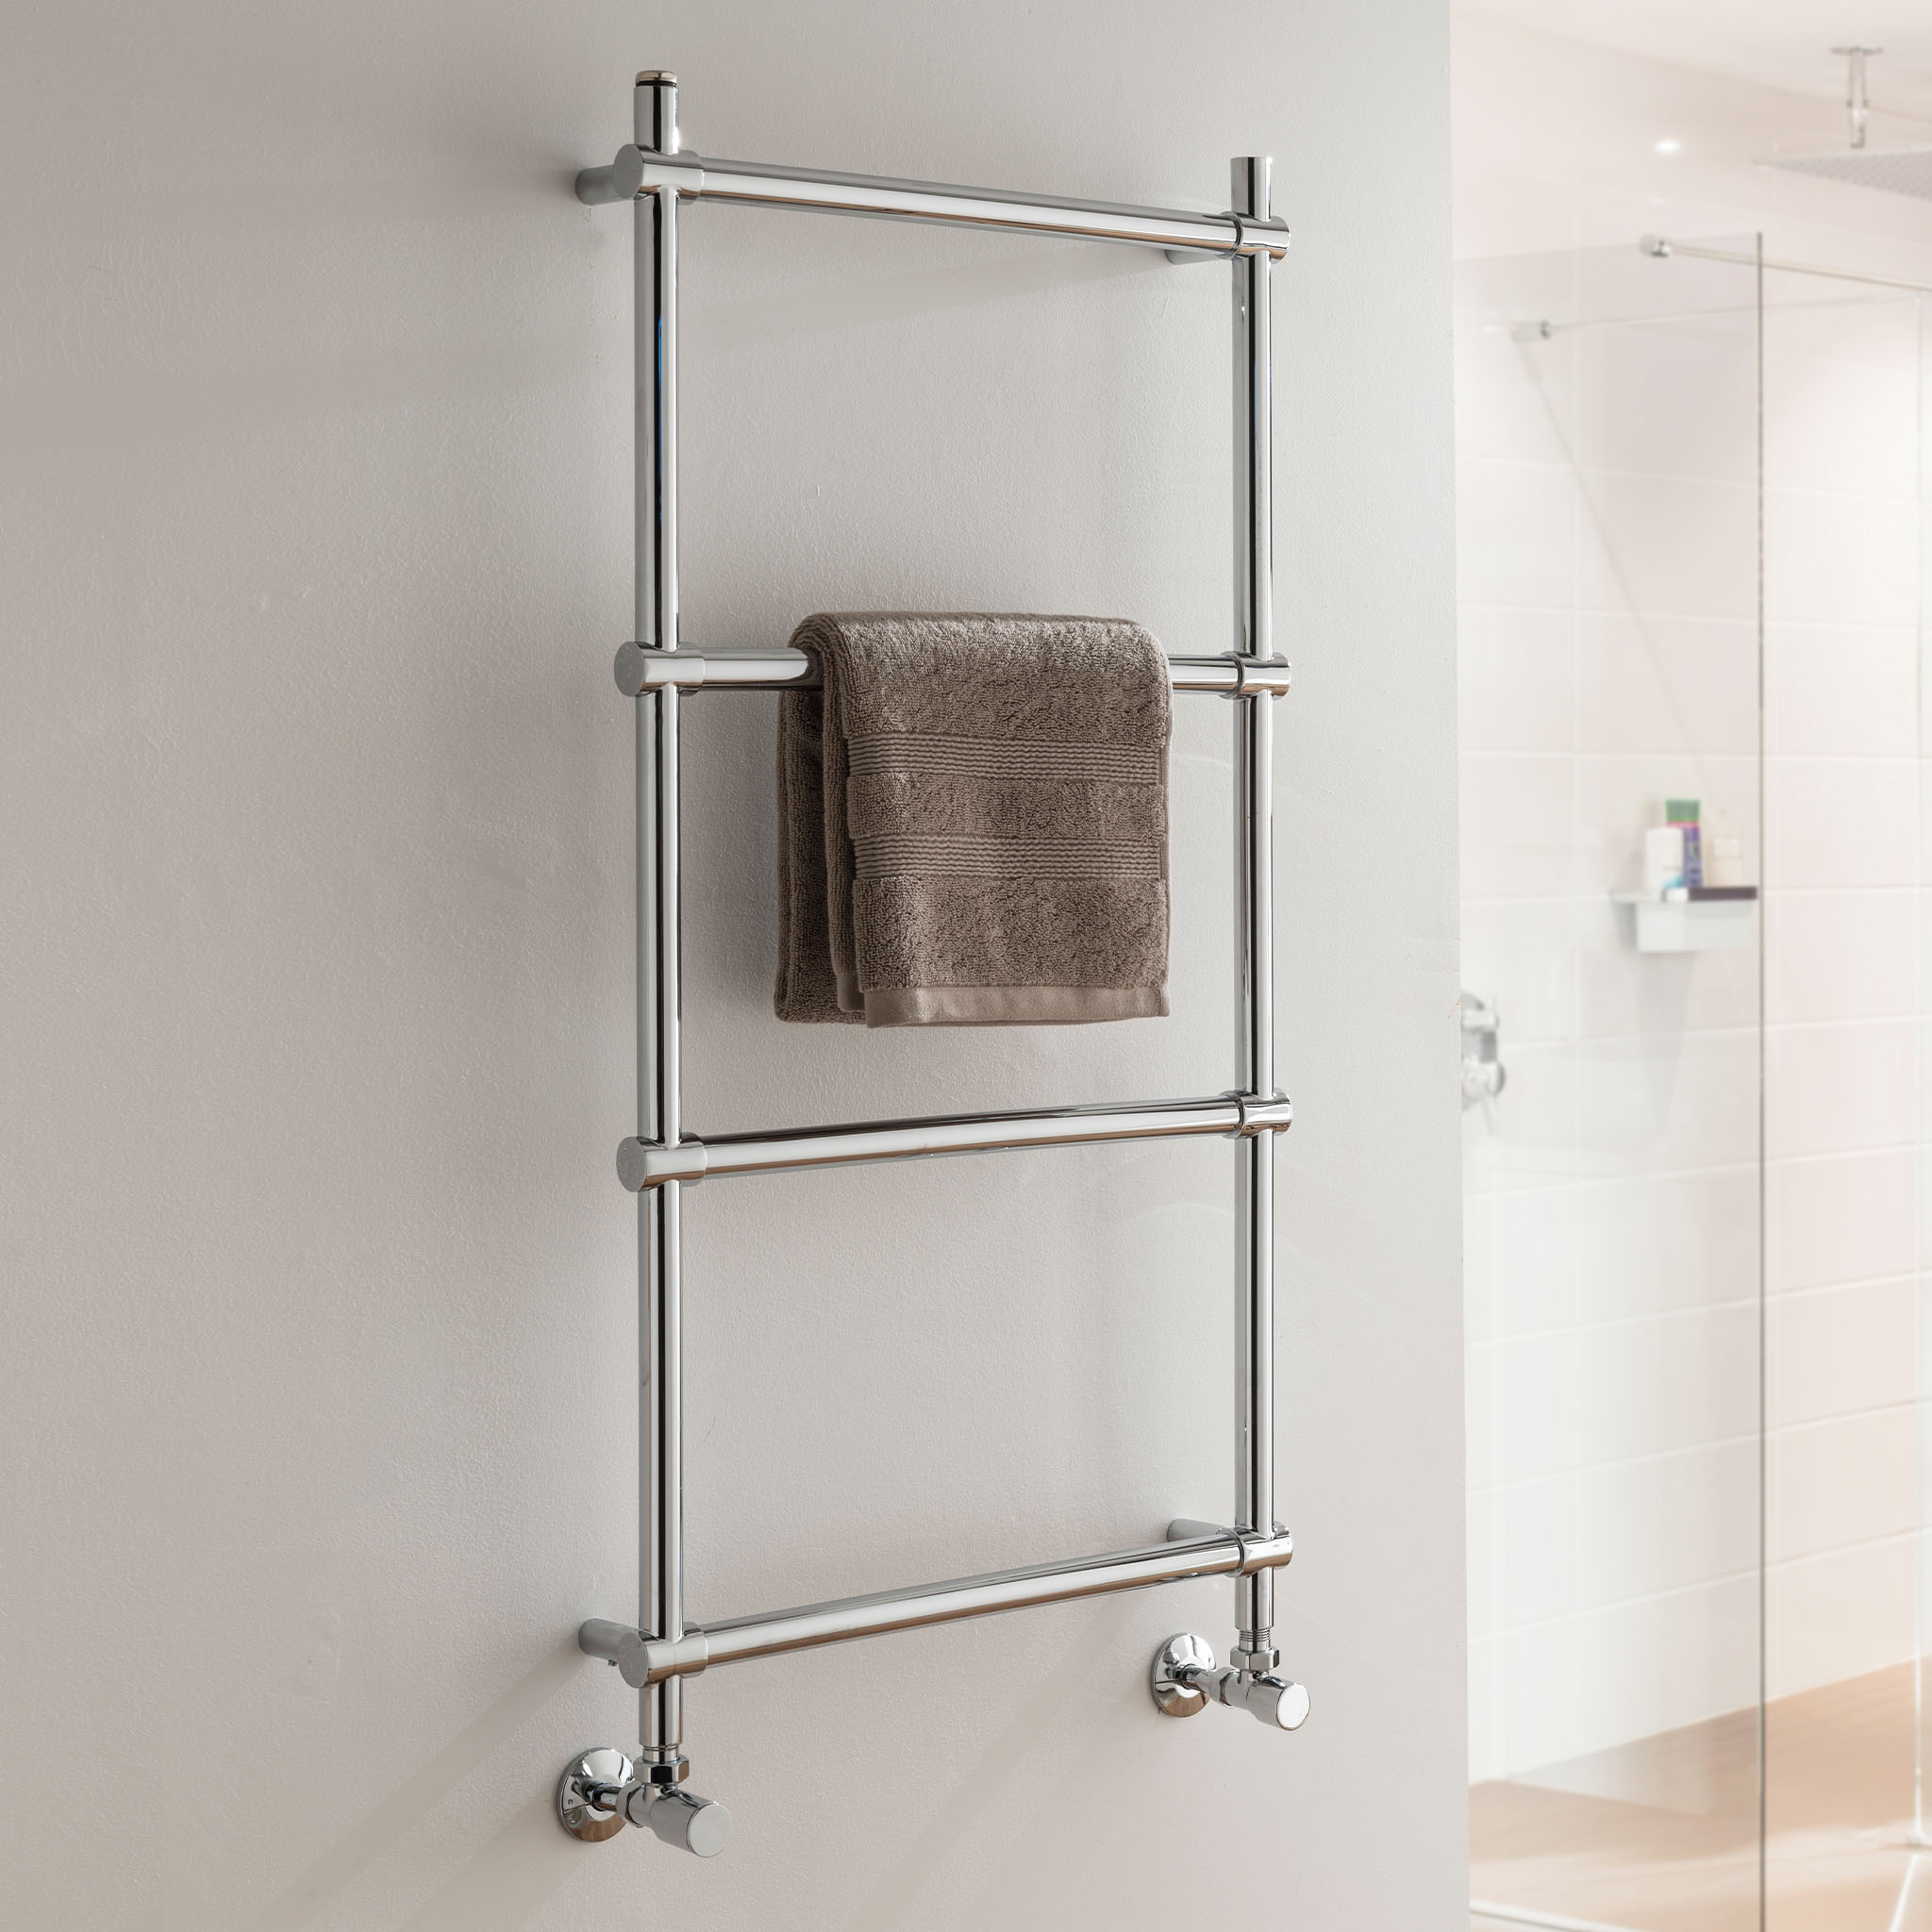 Vogue Unique Wall Mounted Heated Towel Rail 950 x 500mm